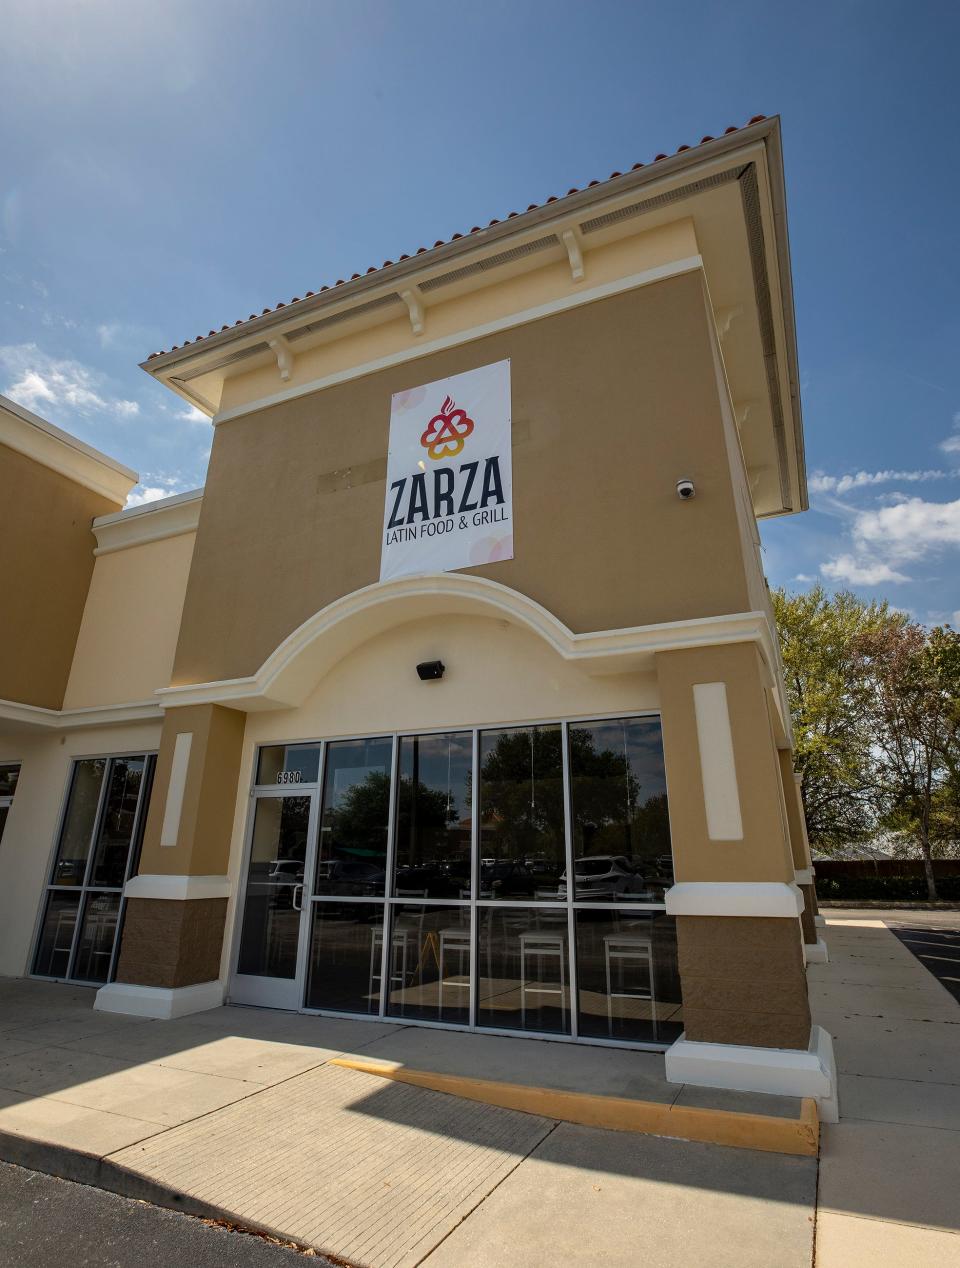 The new Zarza location opens officially on Saturday at 7 a.m. at 6980 Cypress Gardens Blvd. in Winter Haven.